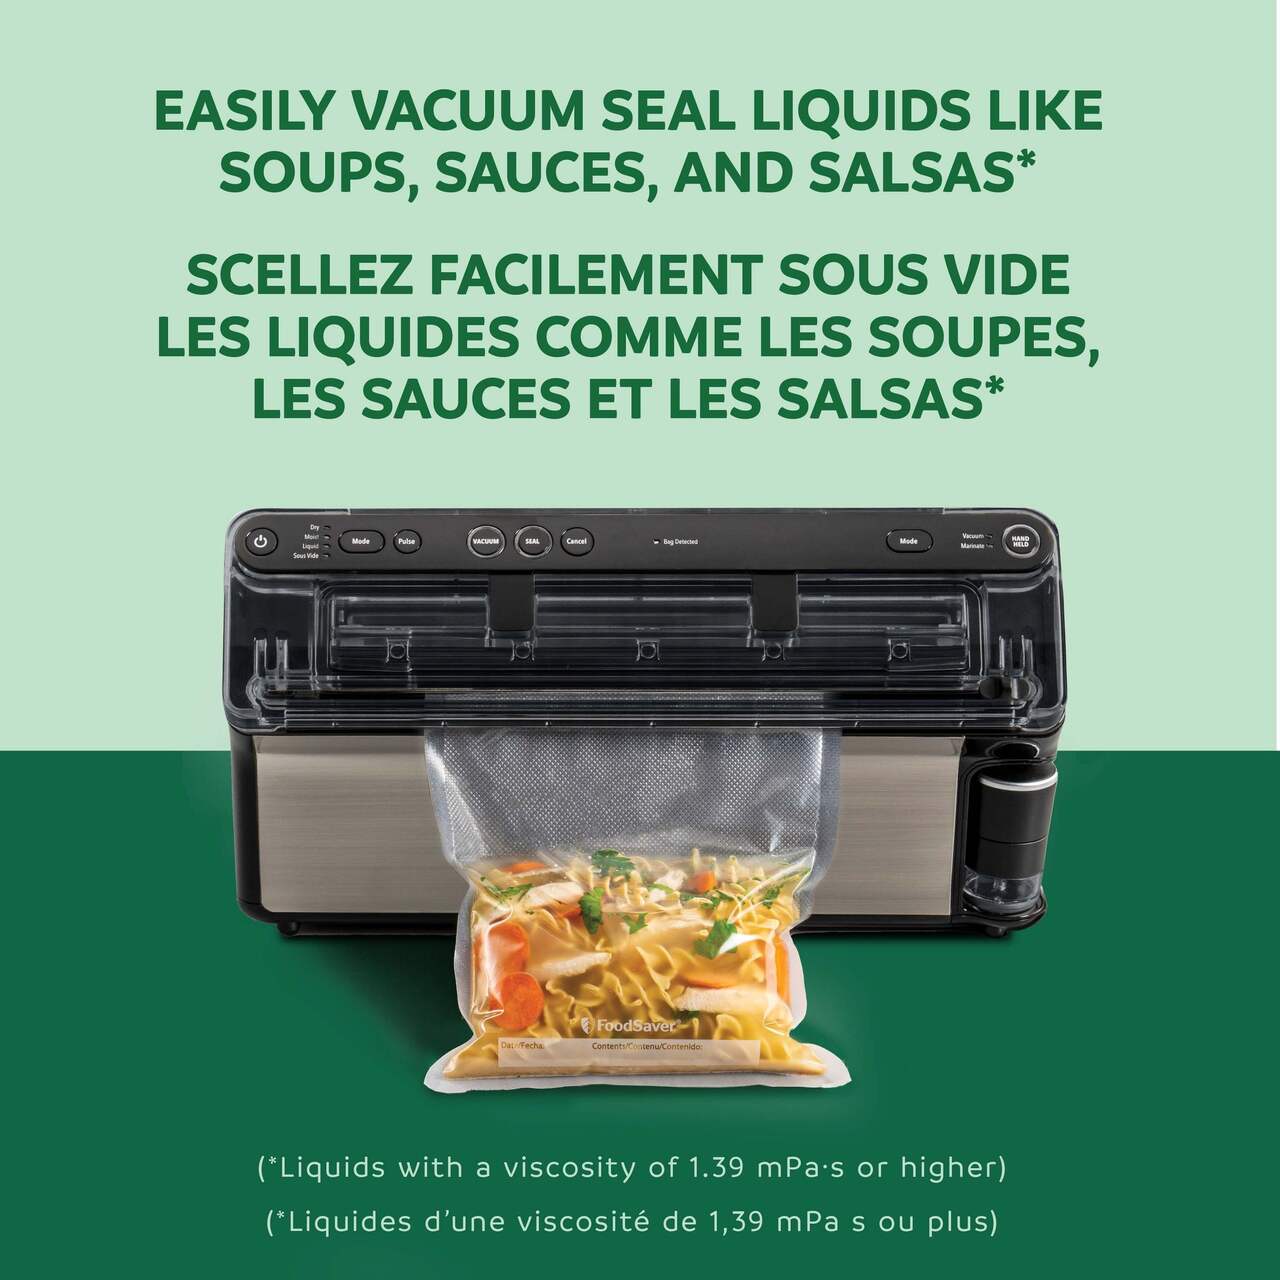 https://media-www.canadiantire.ca/product/living/kitchen/kitchen-appliances/0430337/foodsaver-elite-all-in-one-liquid--ba9372a7-c47c-47fc-ba00-bb85d9762964-jpgrendition.jpg?imdensity=1&imwidth=1244&impolicy=mZoom